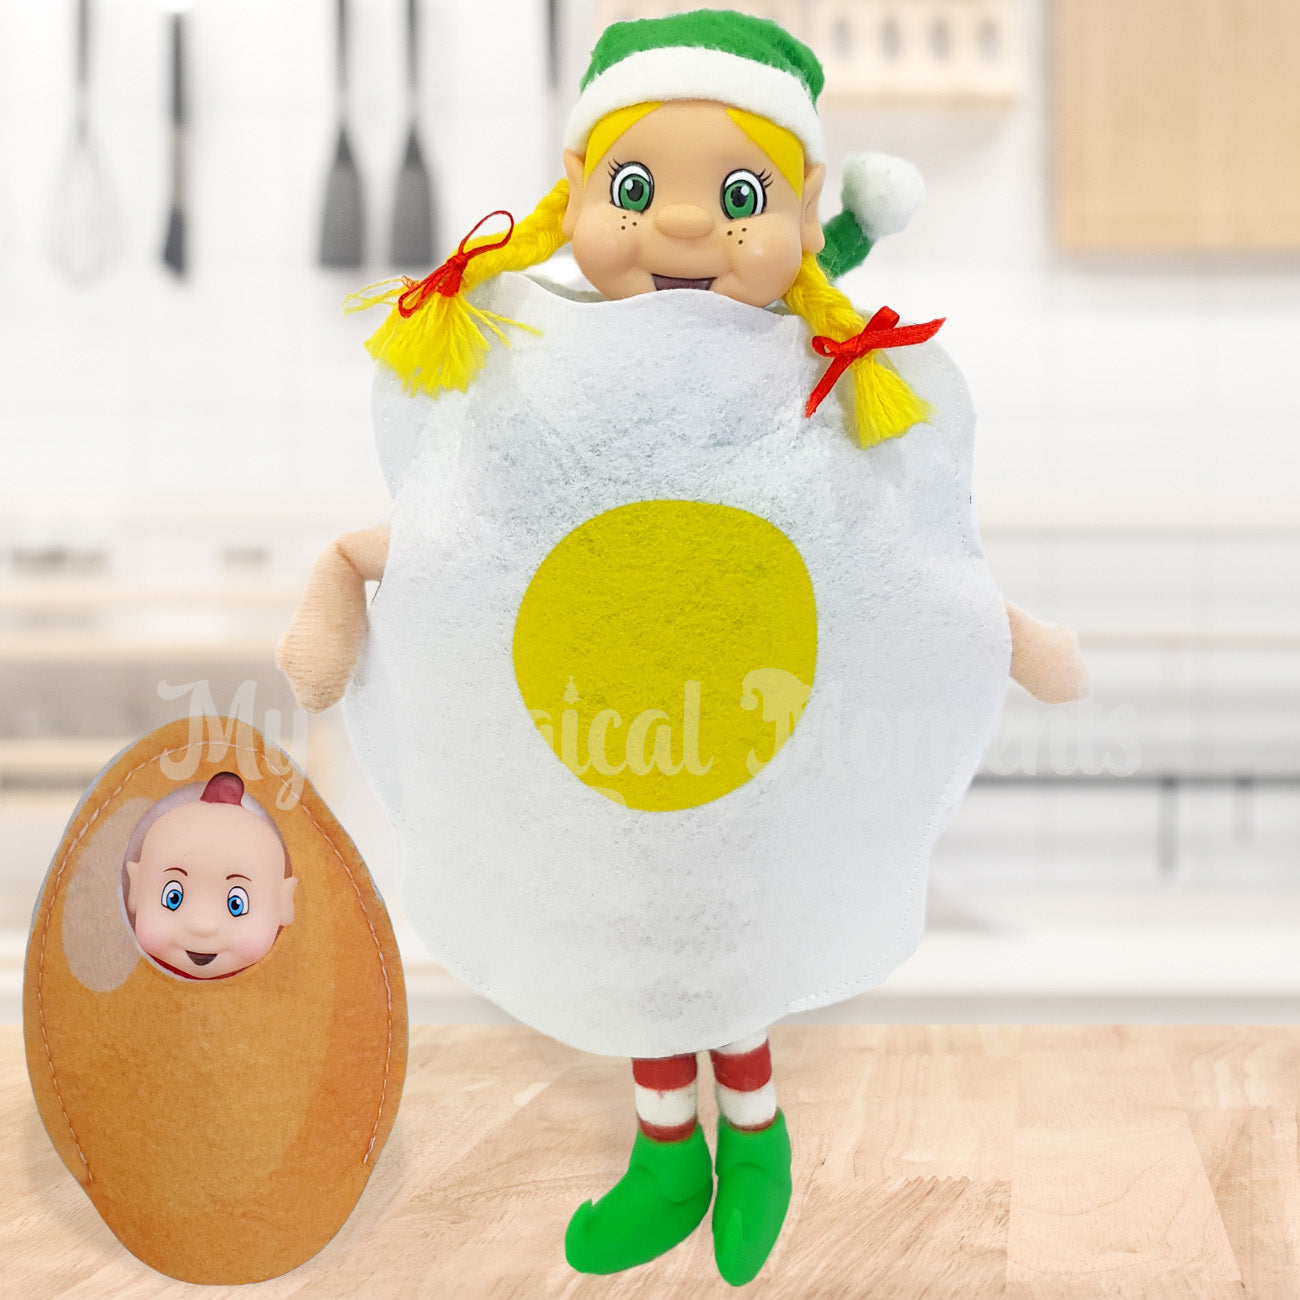 Egg Yolk costume worn by an elf with a baby egg elf for breakfast